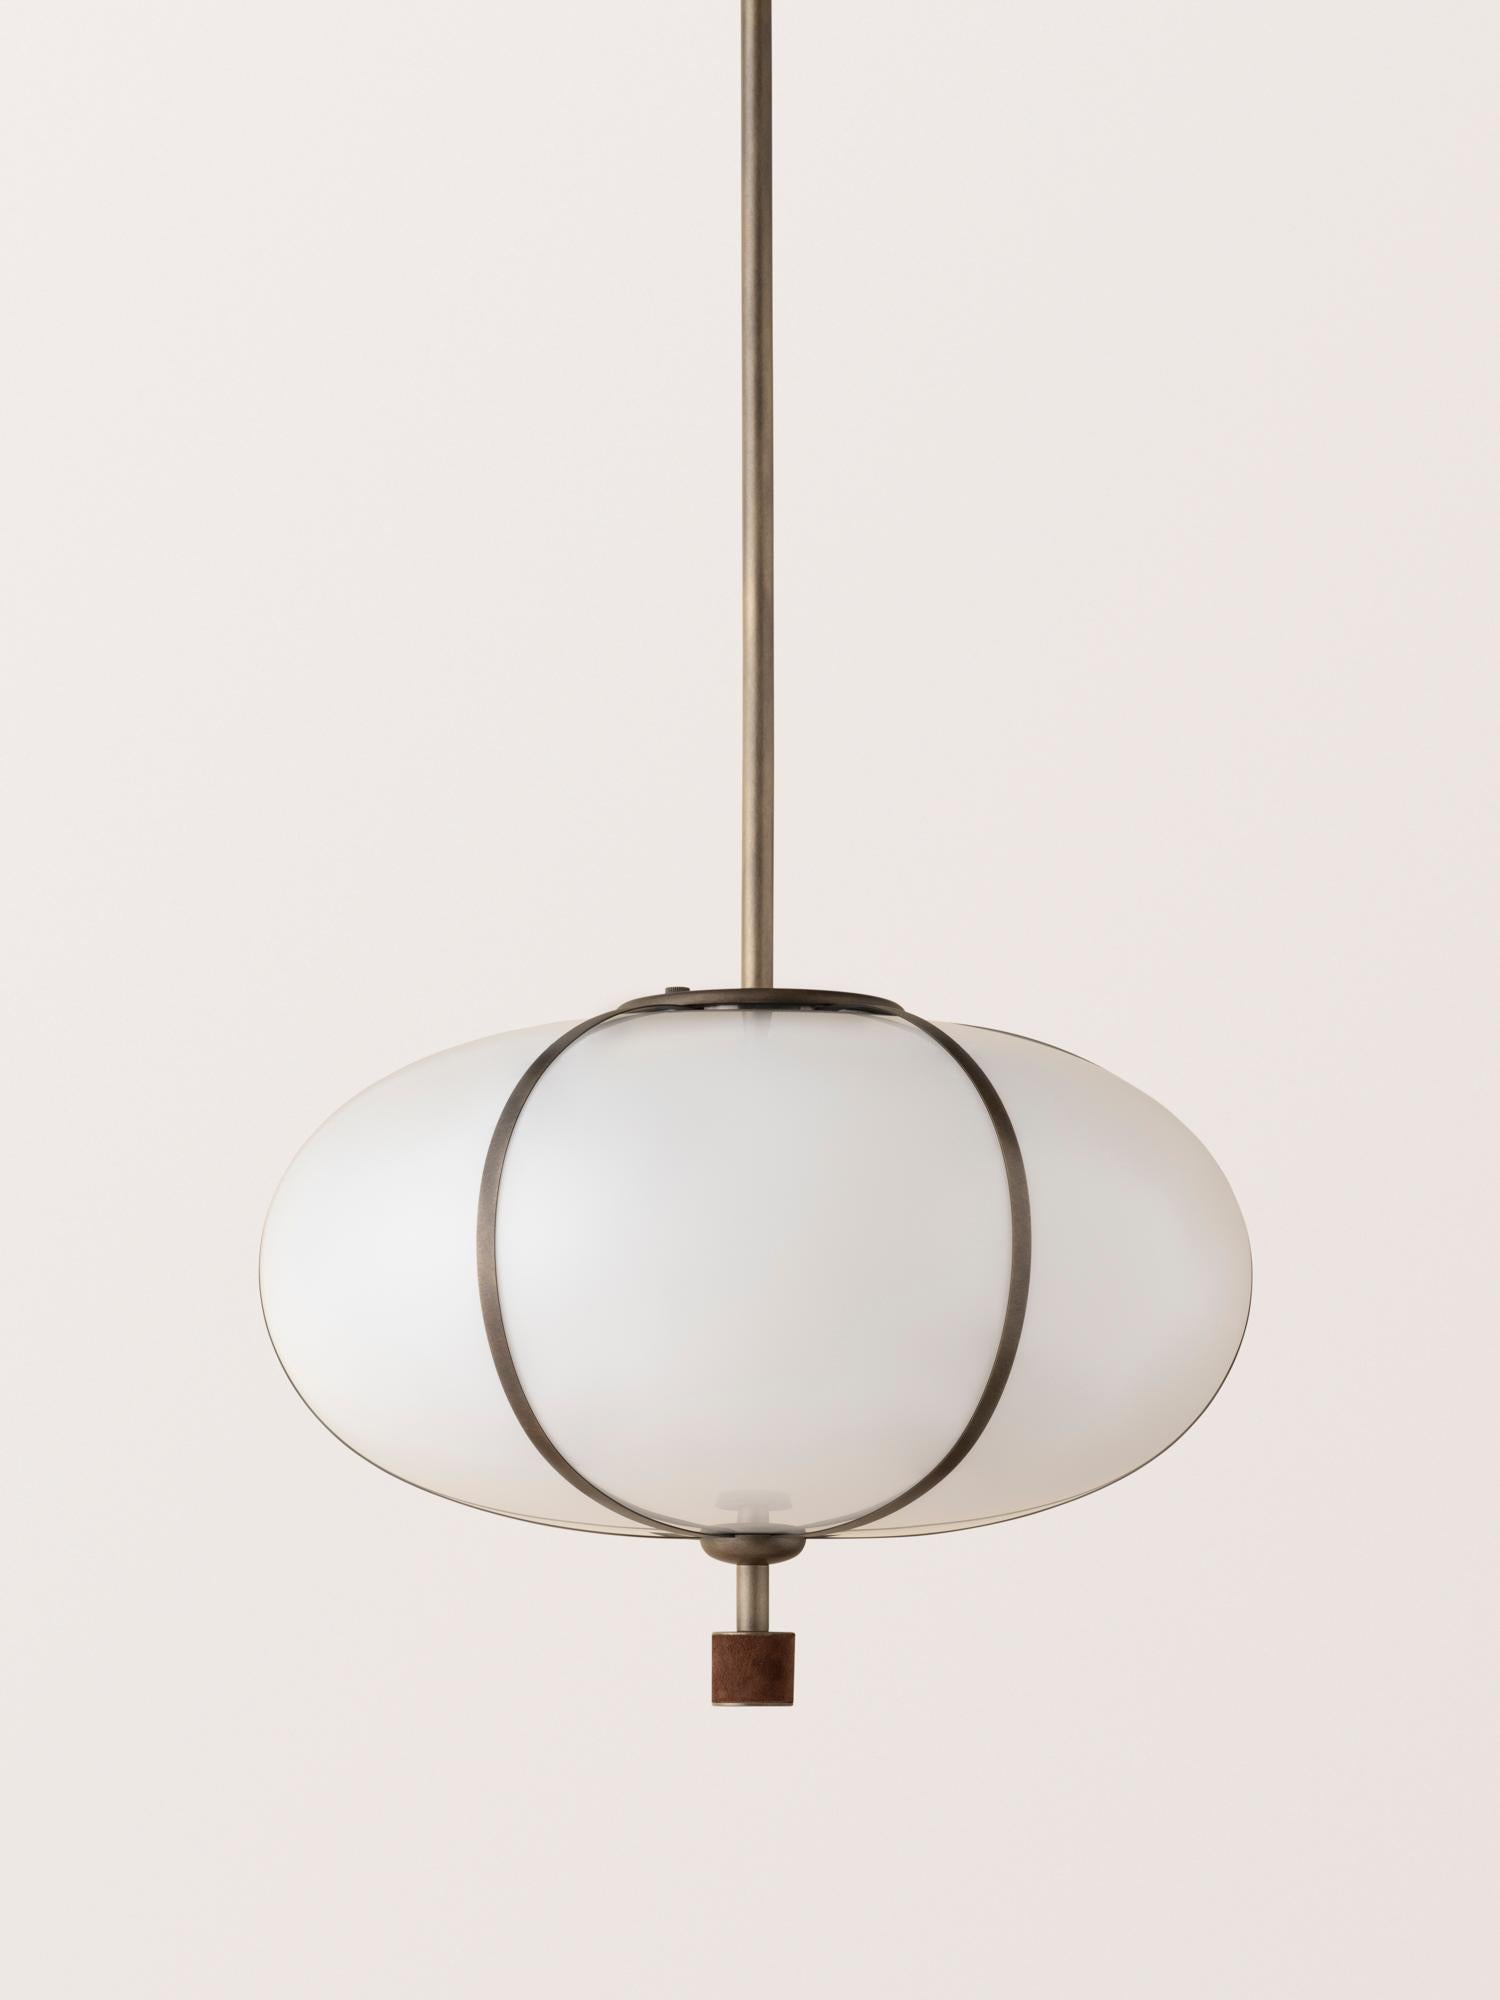 The Rib Pendant - Large Ellipse is blown in Italy and delicately framed by thin brass ribs. A cylindrical brass finial, with optional hand-wrapped leather or suede, elongates the fixture and adds a finishing touch of refinement.

This listing is